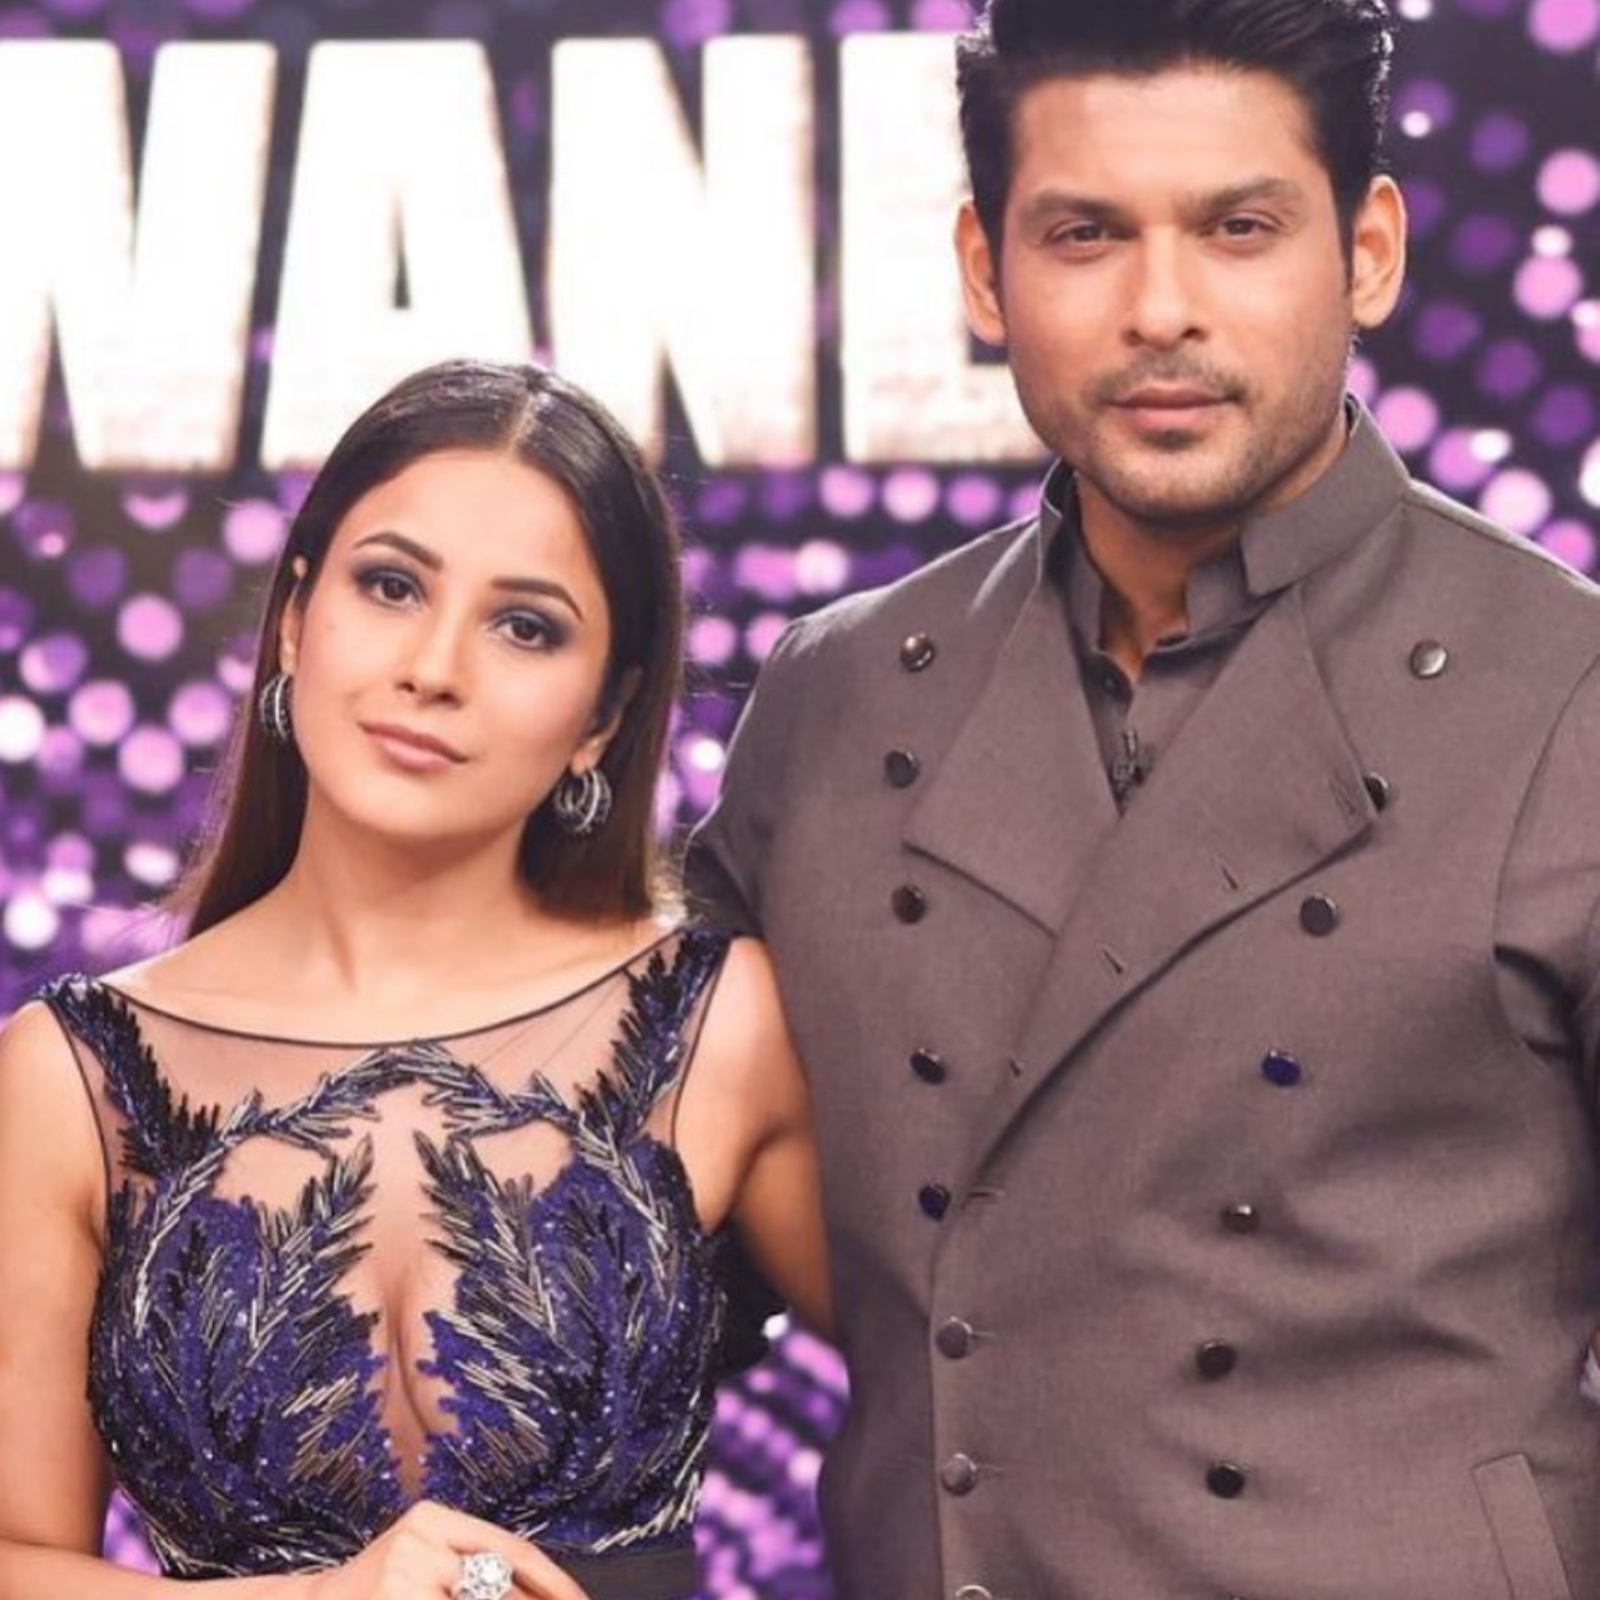 Sidharth Shukla and Shehnaaz Gill on the sets of Dance Deewane, their last on-screen appearance before Shukla's shocking demise on Spemtember 2.